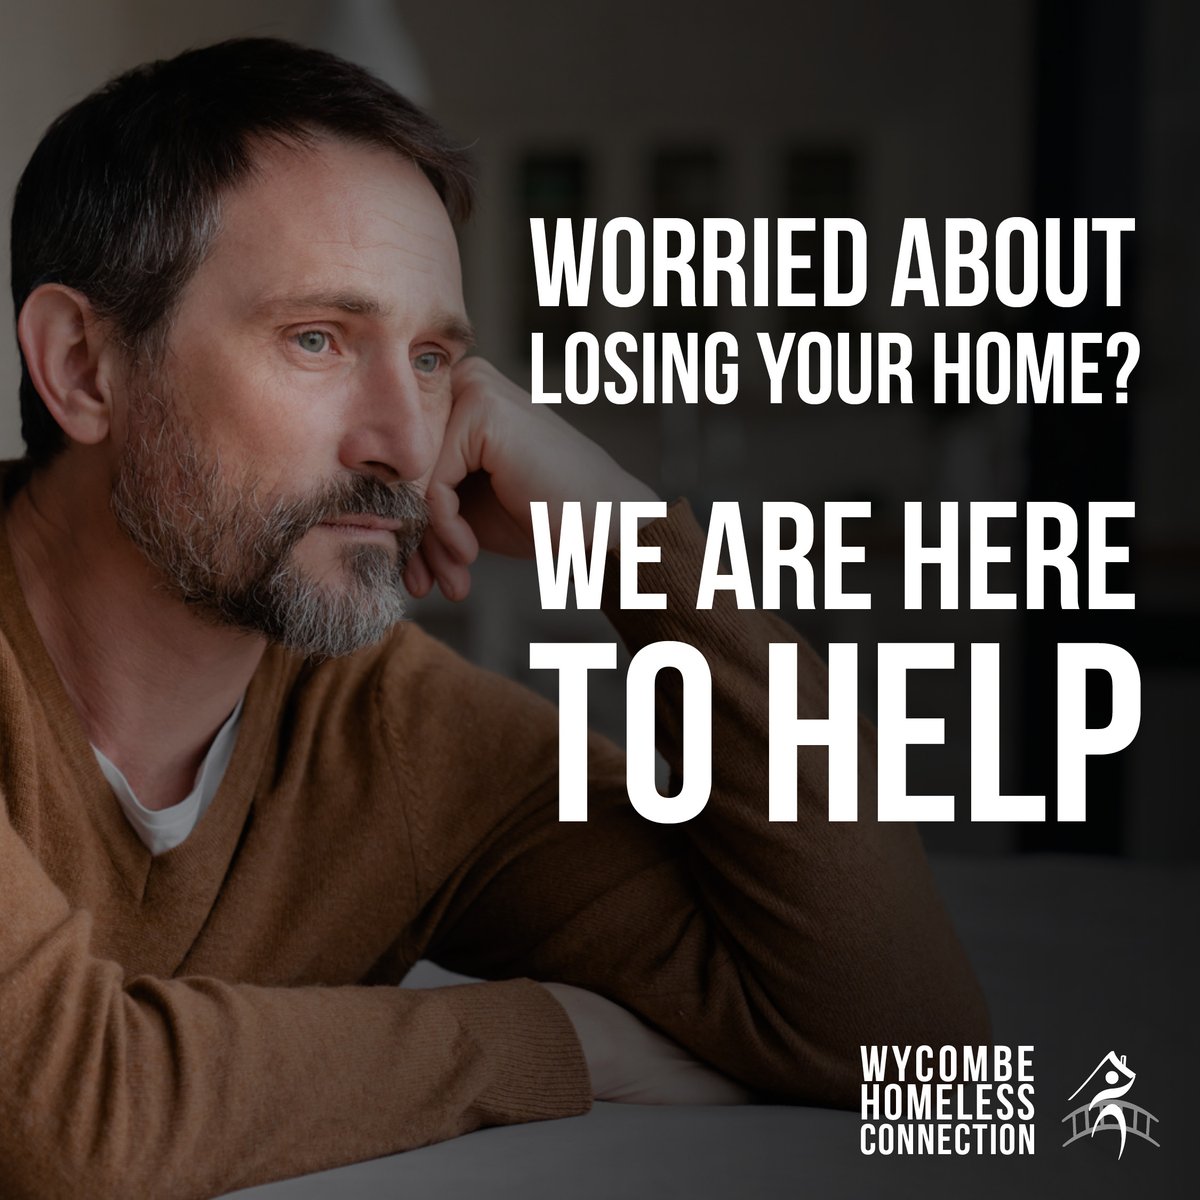 If you are worried about losing your home we are here for your with our FREE homelessness prevention services: Call our homelessness helpline on 01494 447699 Open Monday to Friday 10am - 4pm Or email us: contact@wyhoc.org.uk You can find out more here: wyhoc.org.uk/homelessness-p…